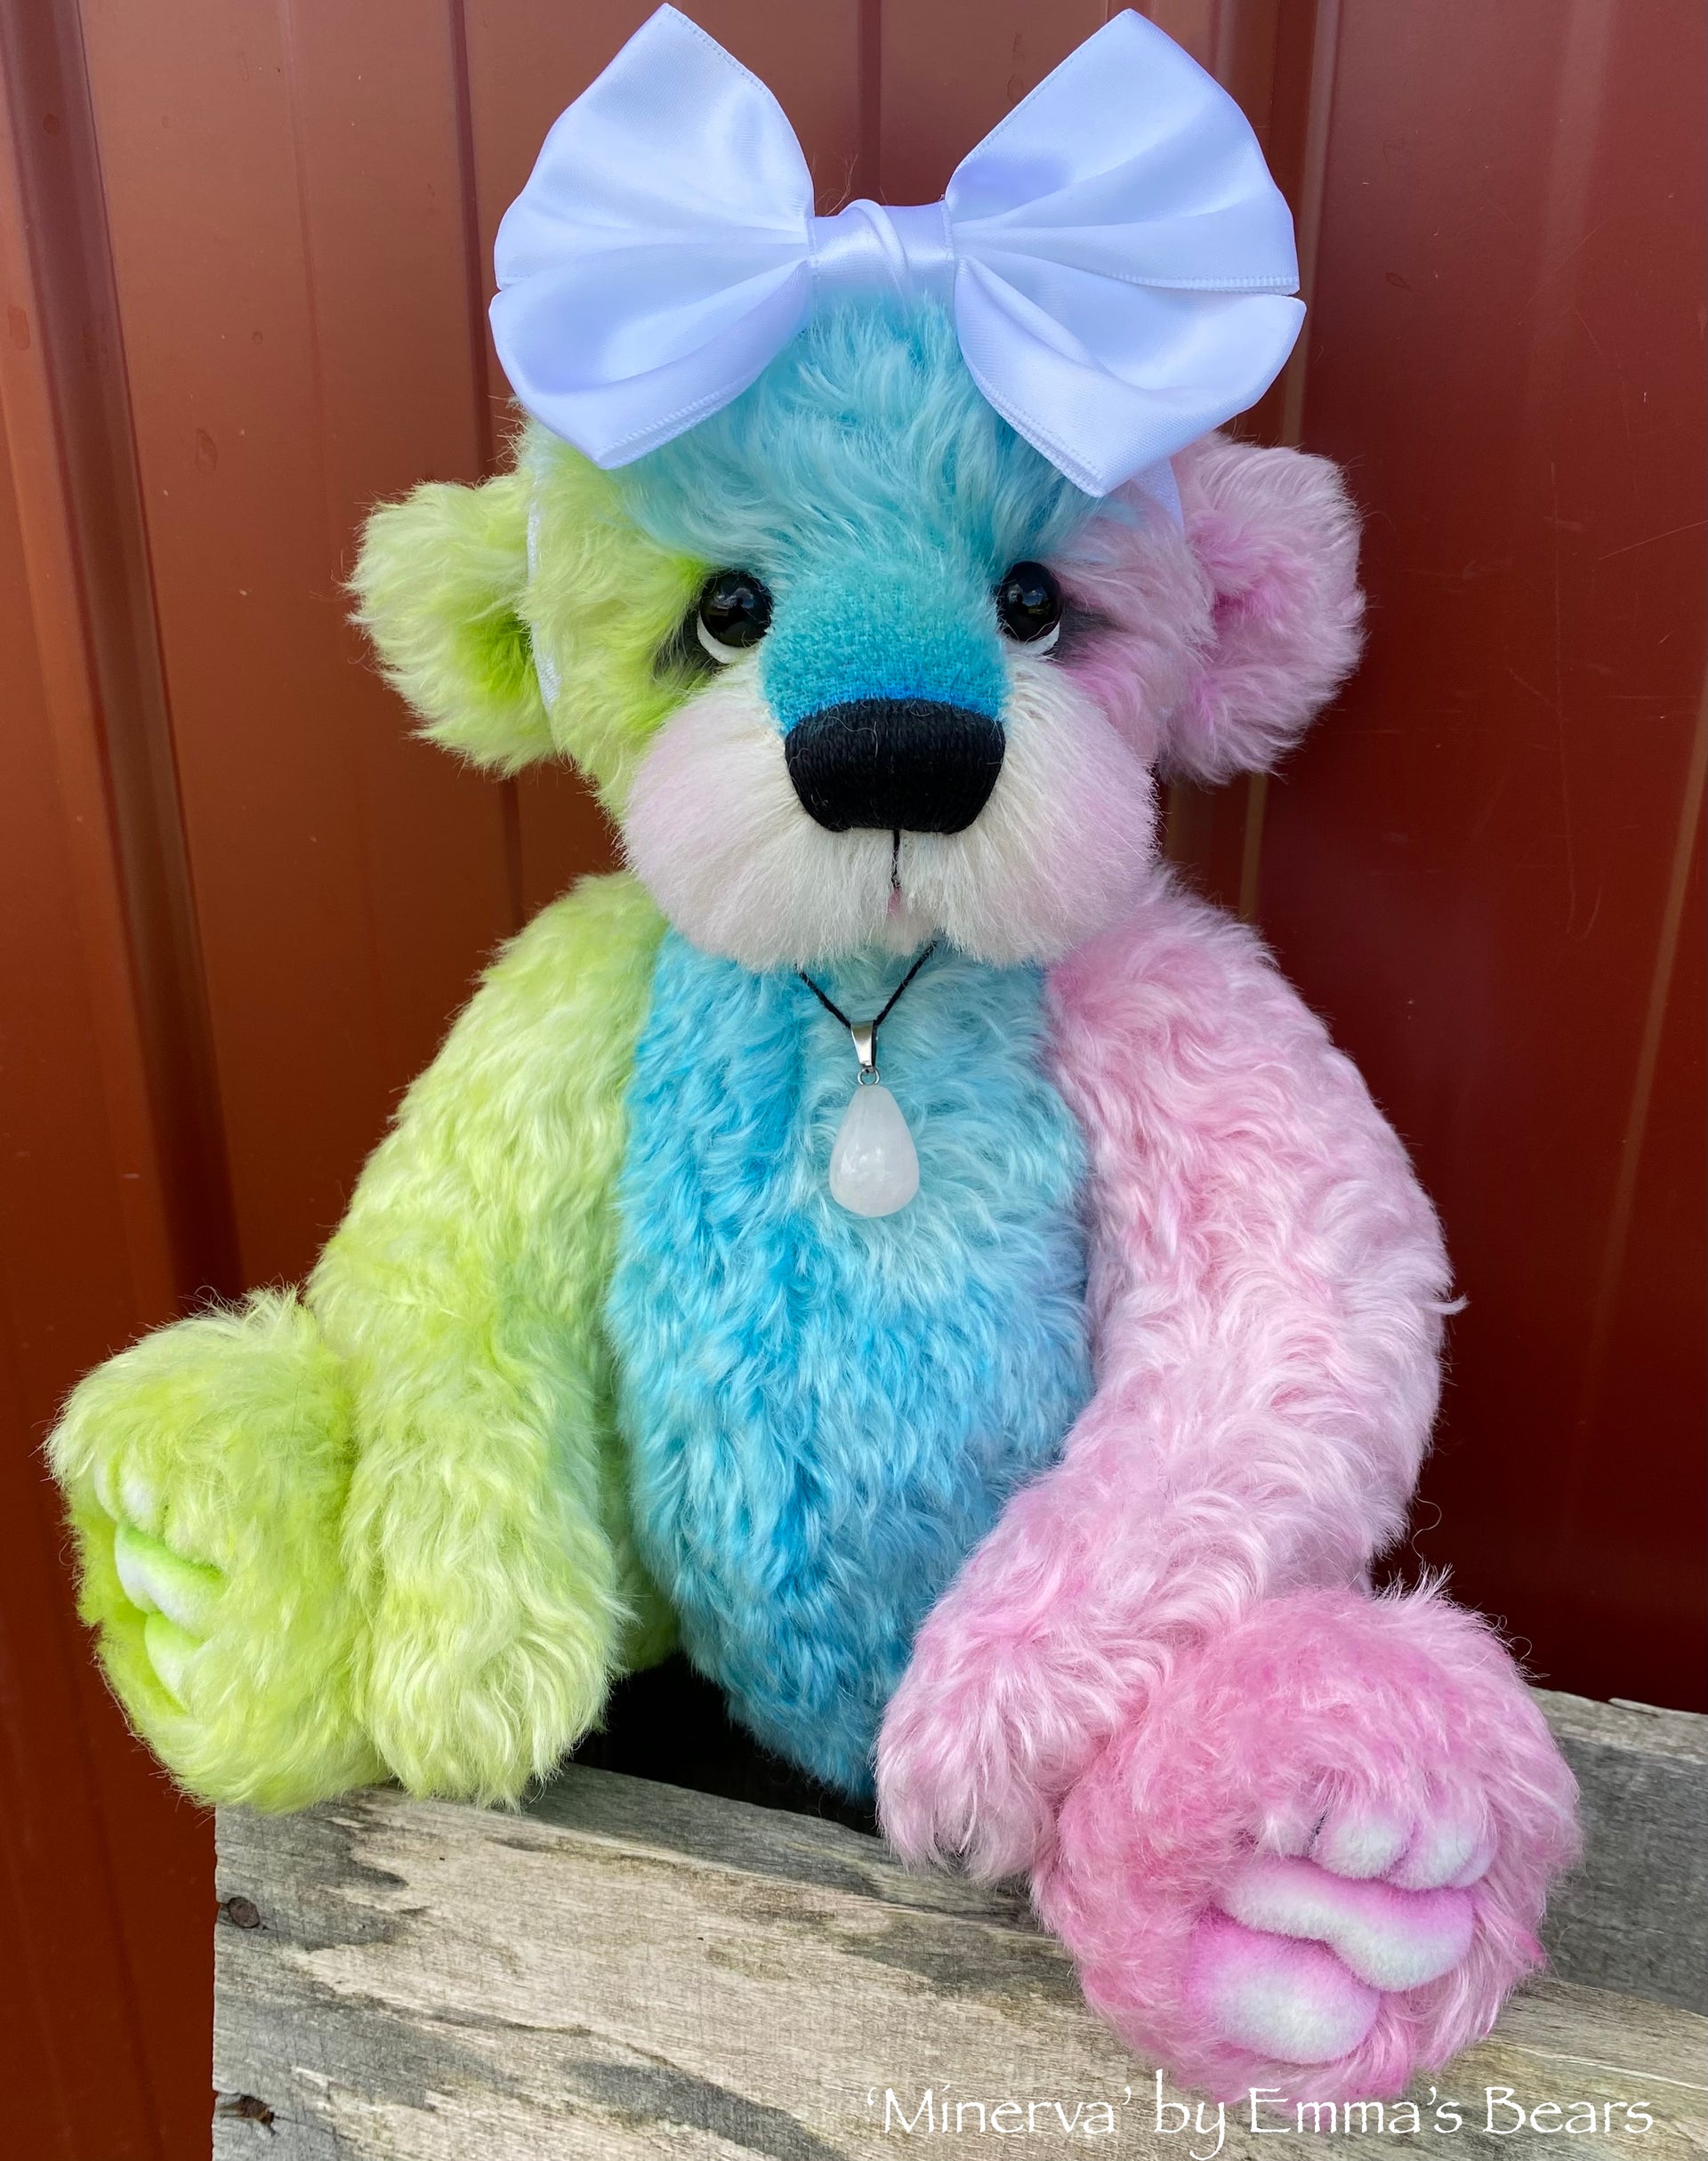 Minerva - 12" Hand-dyed mohair and viscose artist bear by Emma's Bears - OOAK